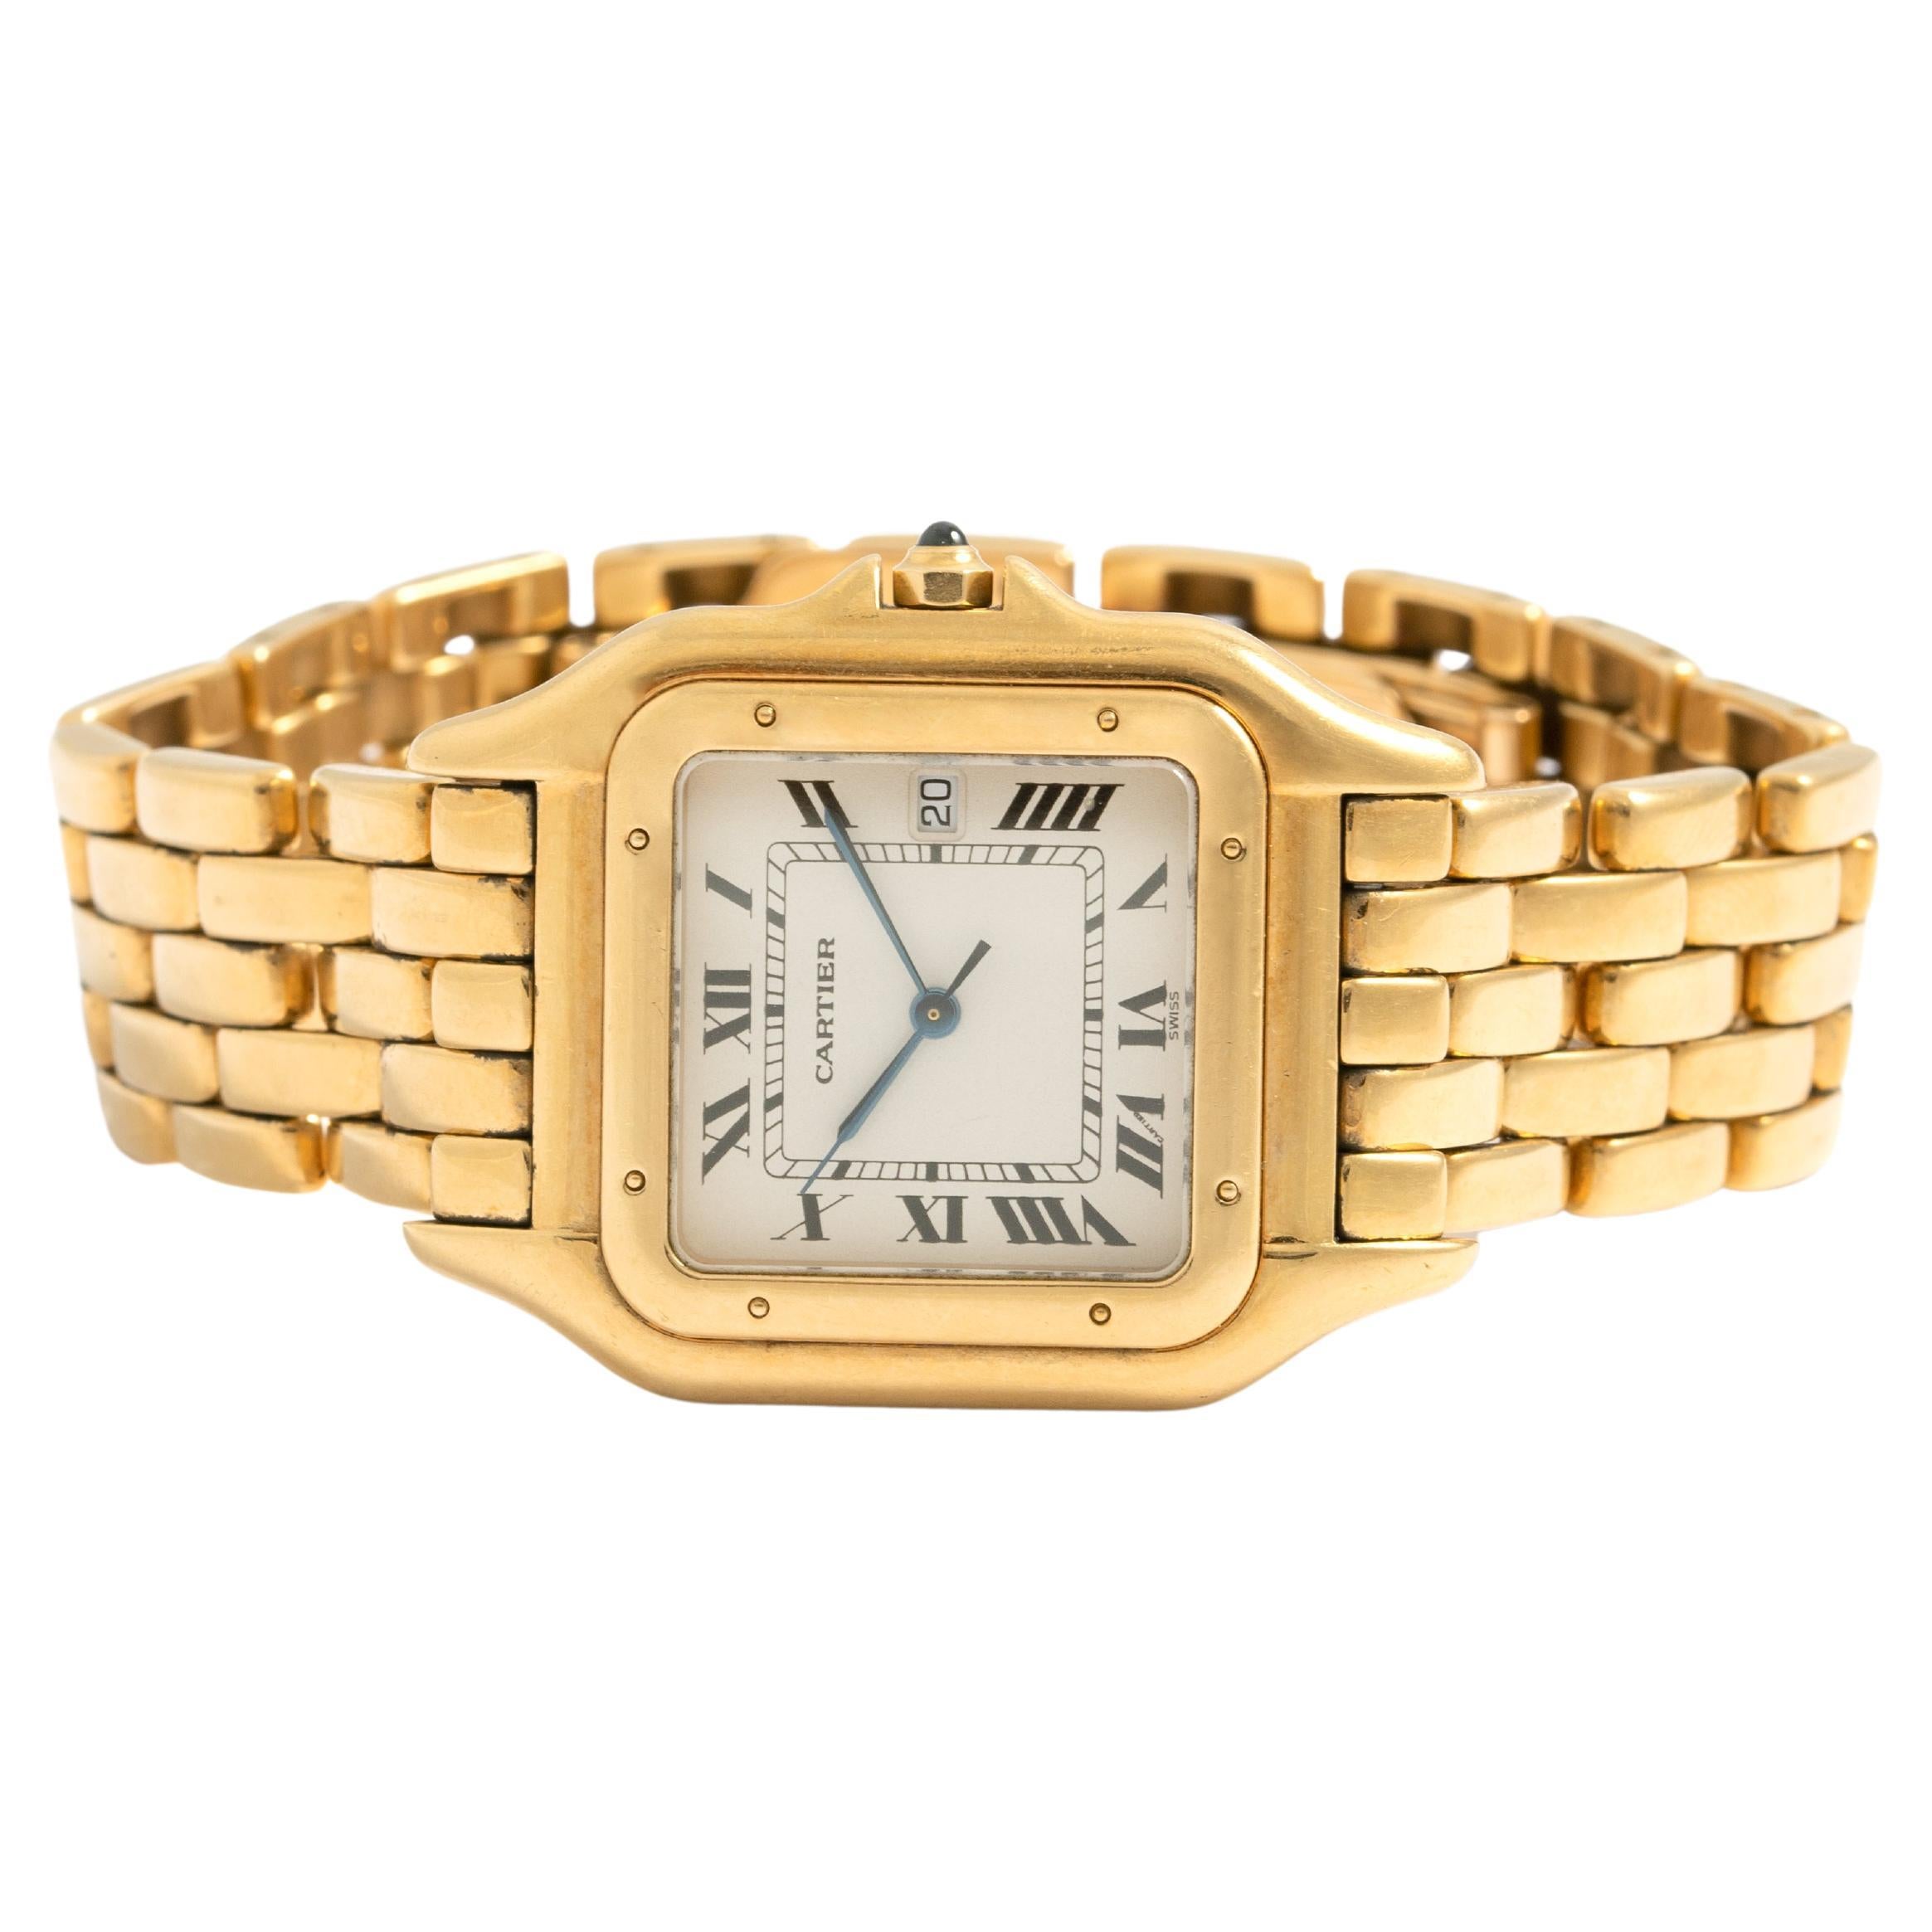 Cartier Panthere Large Mens Watch. 29mm 18K yellow case with 18K yellow gold bezel. Off-white dial with blue steel hands and black Roman numeral hour markers. Date display at the 3 o'clock position. Minute markers on the inner dial. 18K yellow gold